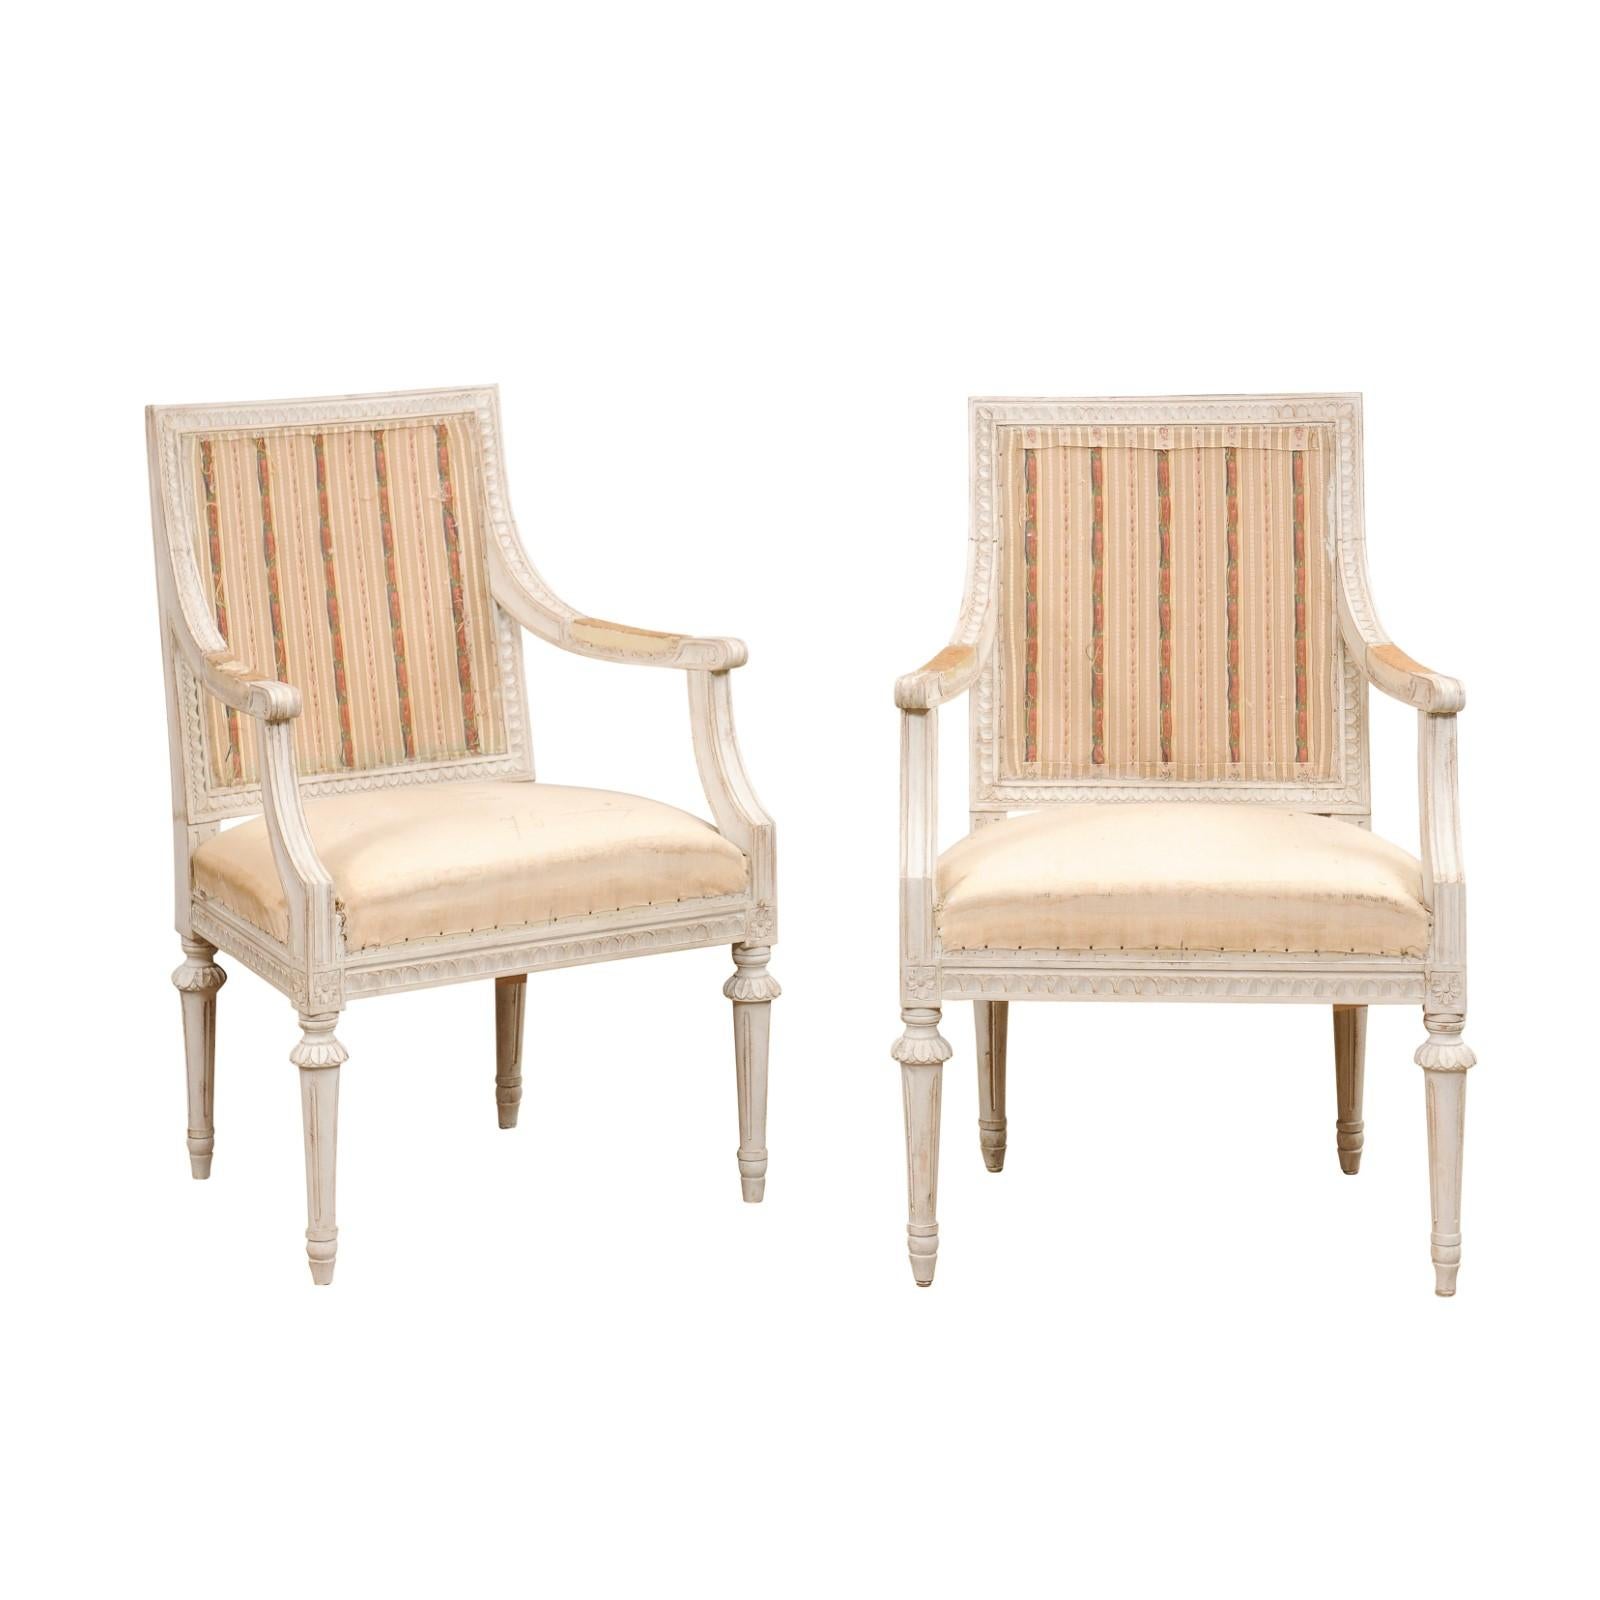 A pair of Swedish Gustavian style painted wood armchairs from the early 20th century, with scrolling arms, carved waterleaf and rosette motifs and fluted legs. Created in Sweden during the early years of the 20th century, each of this pair of